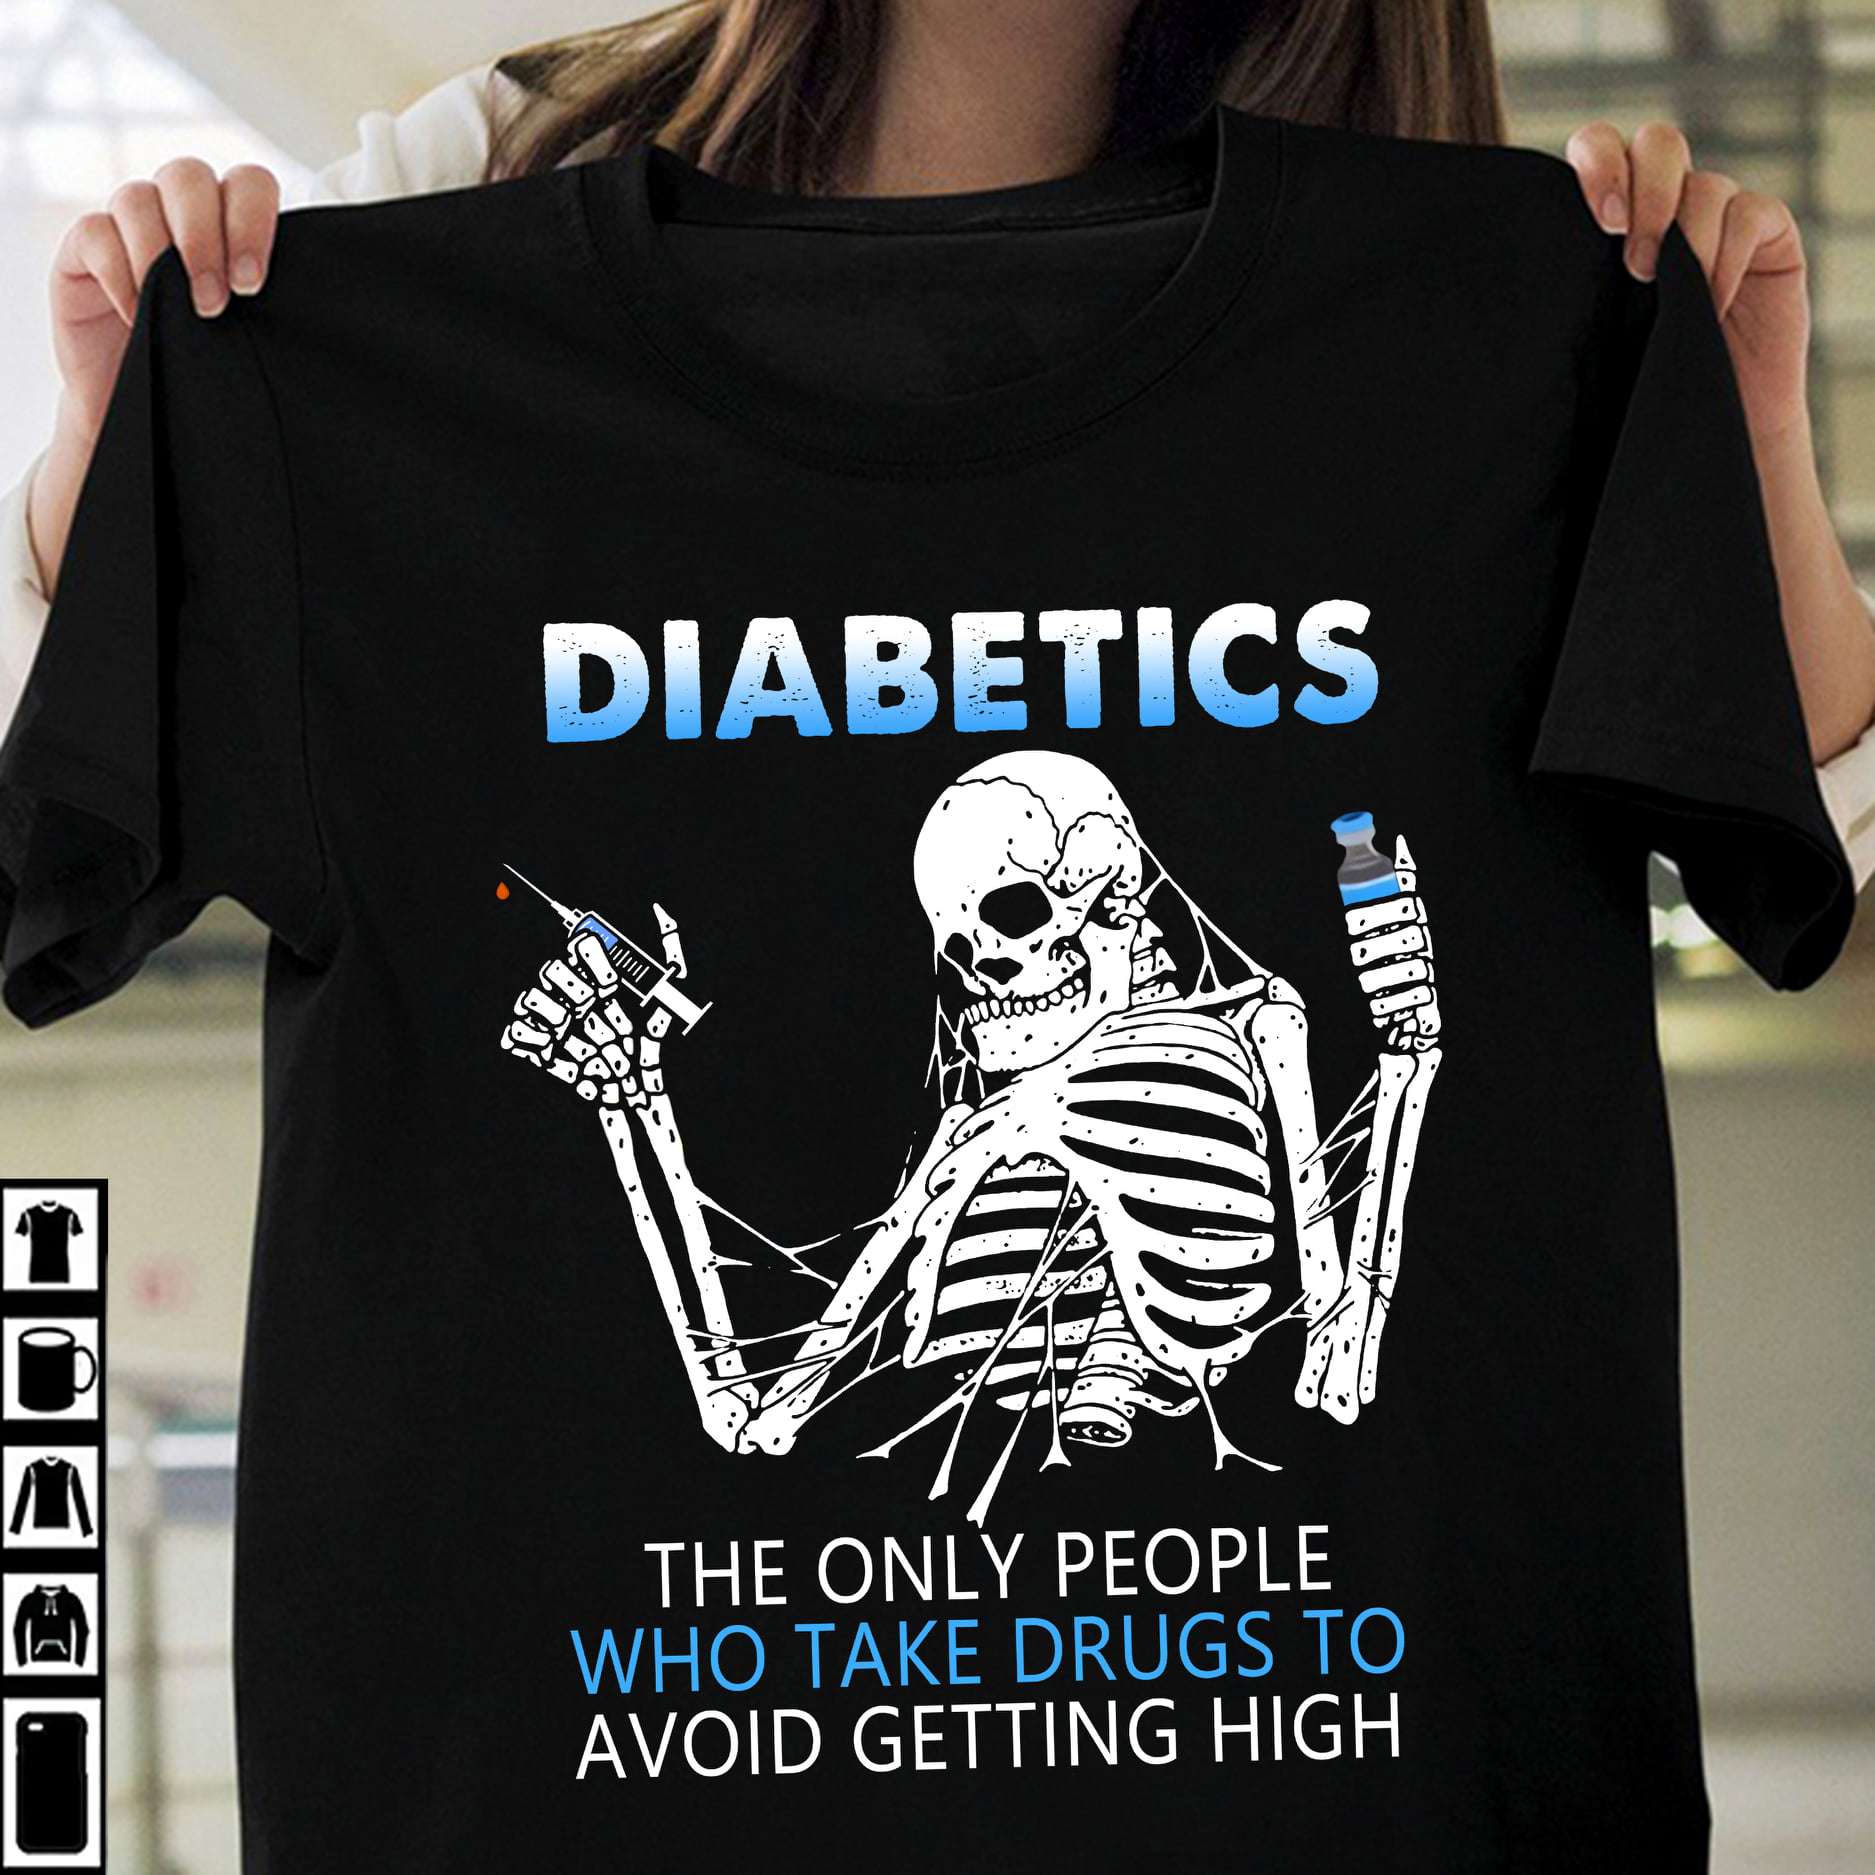 Diabetes Skeleton - Diabetes the only people who take drugs to avoid getting high